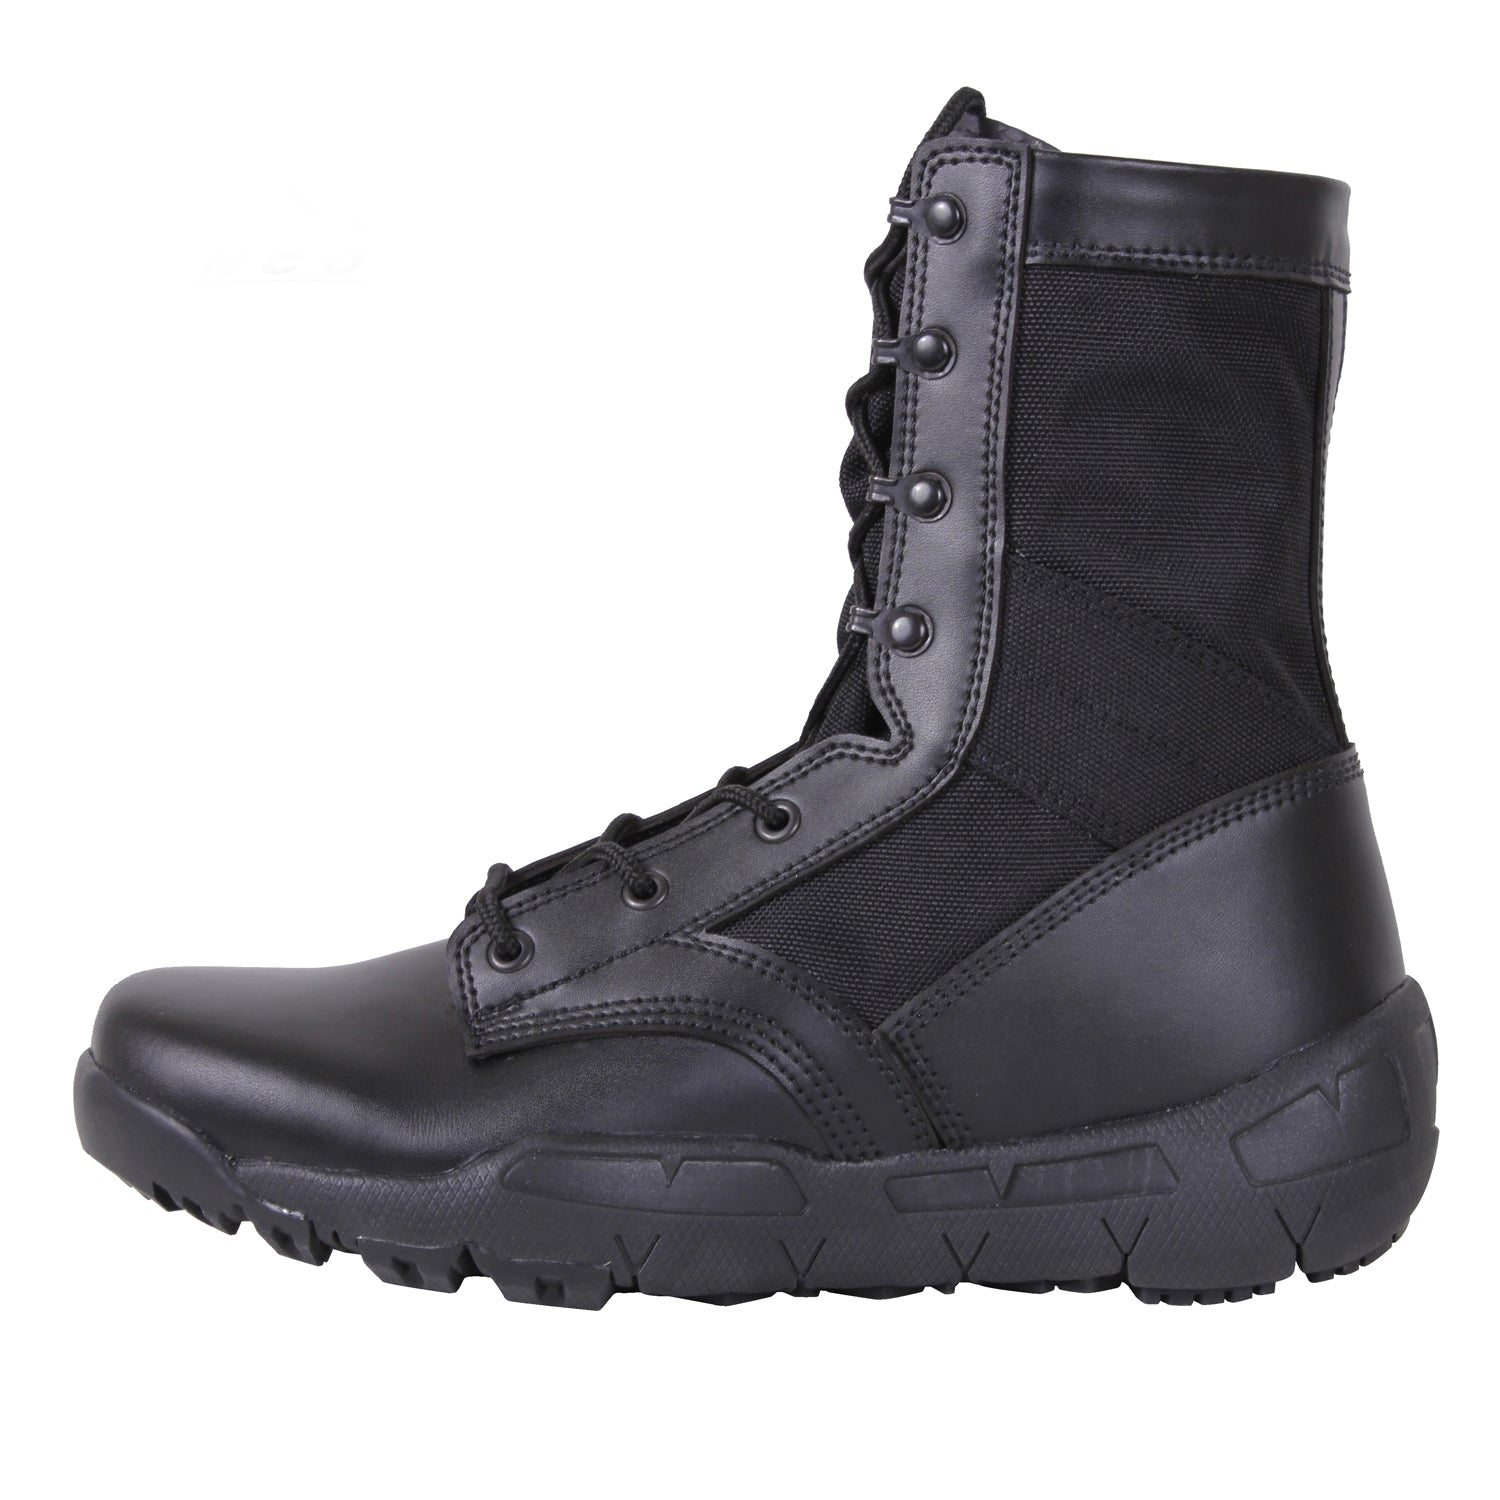   Rothco’s V-Max Lightweight Tactical Boot is the optimal choice for an all-purpose military-style boot.      Military-Style 8 ½” Cross Training Boot Is Designed With The Comfort And Support Of A Running Shoe     The V-Max Lightweight Boot Interior Contains A Removable EVA Insole And 2 Screen Air Vents To Keep Your Feet Cool     Rubber And EVA Outsole Provides Improved Traction While You Are On The Move     Iron Eyelet Lace System Will Keep Your Tactical Boots Tightly Secured